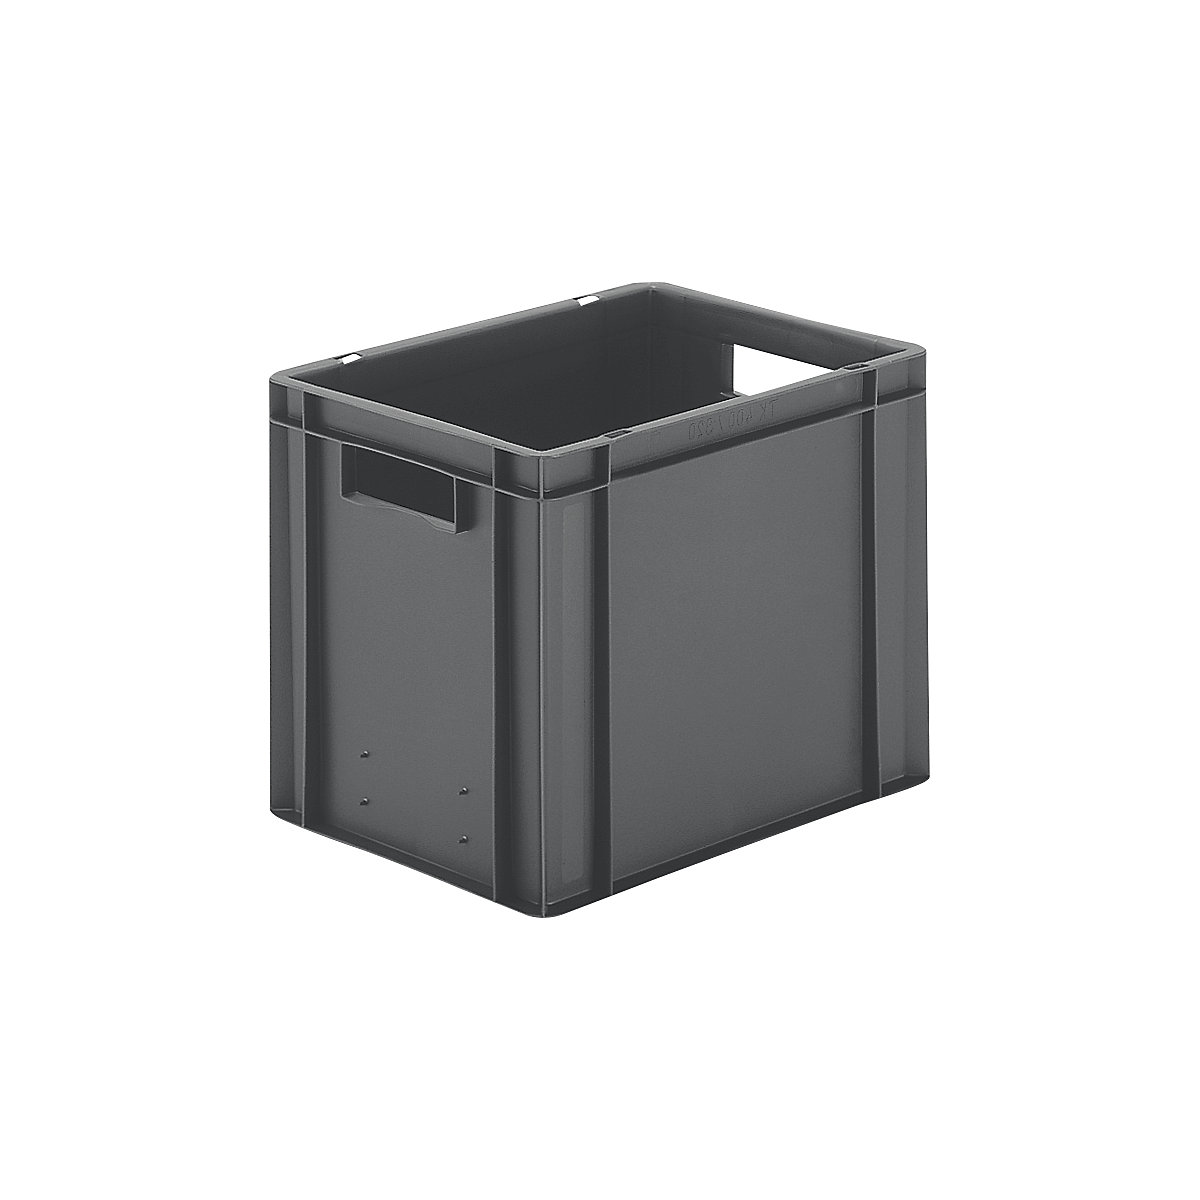 Euro stacking container, closed walls and base, LxWxH 400 x 300 x 320 mm, grey, pack of 5-7